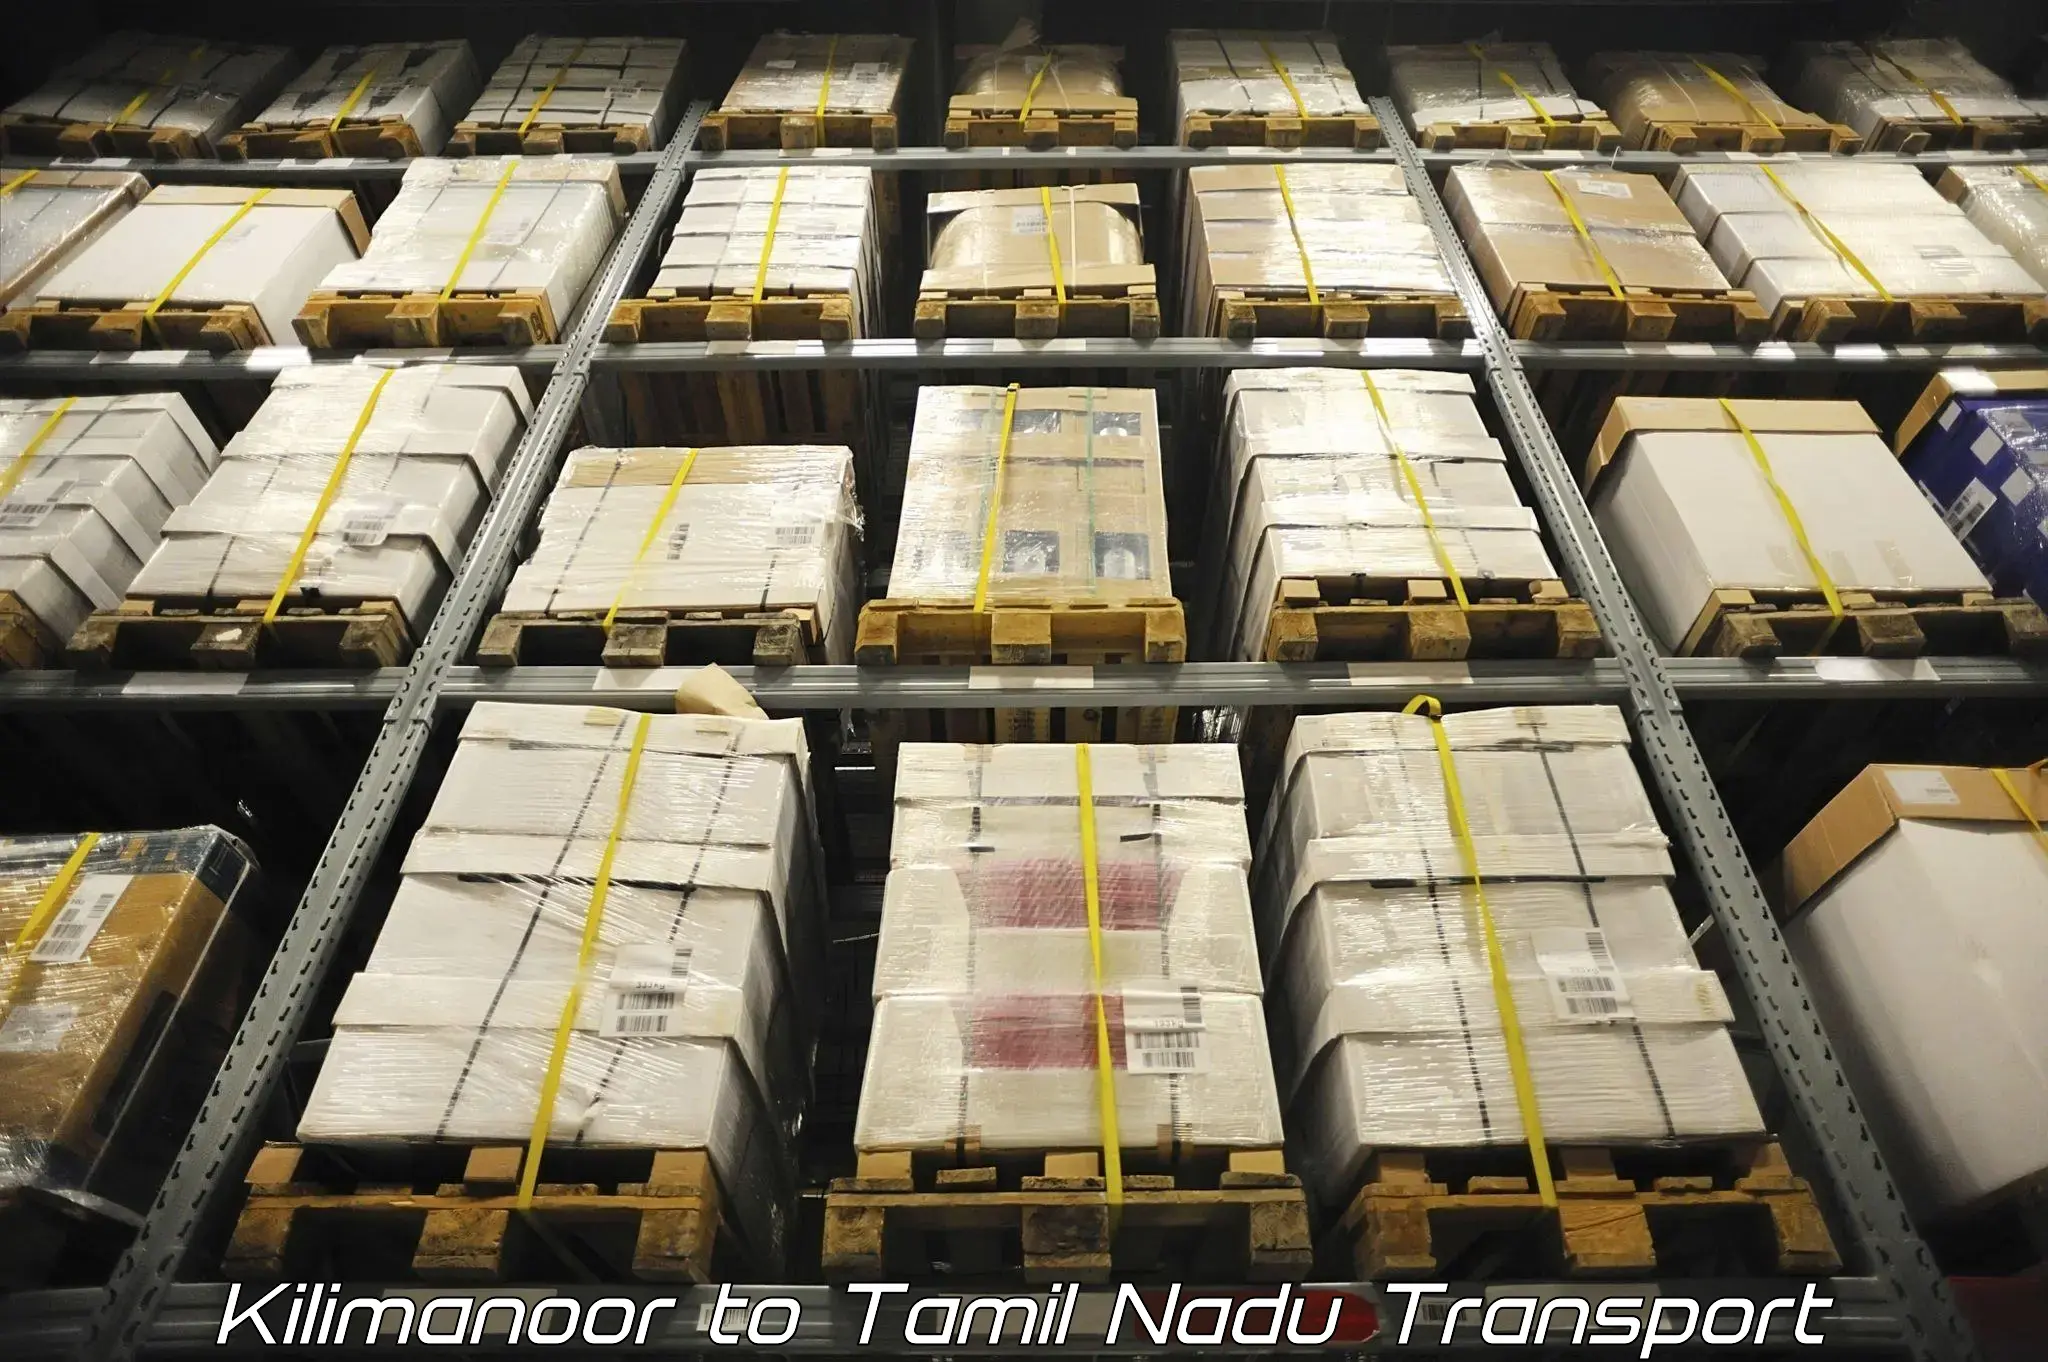 Cargo transportation services Kilimanoor to Ennore Port Chennai